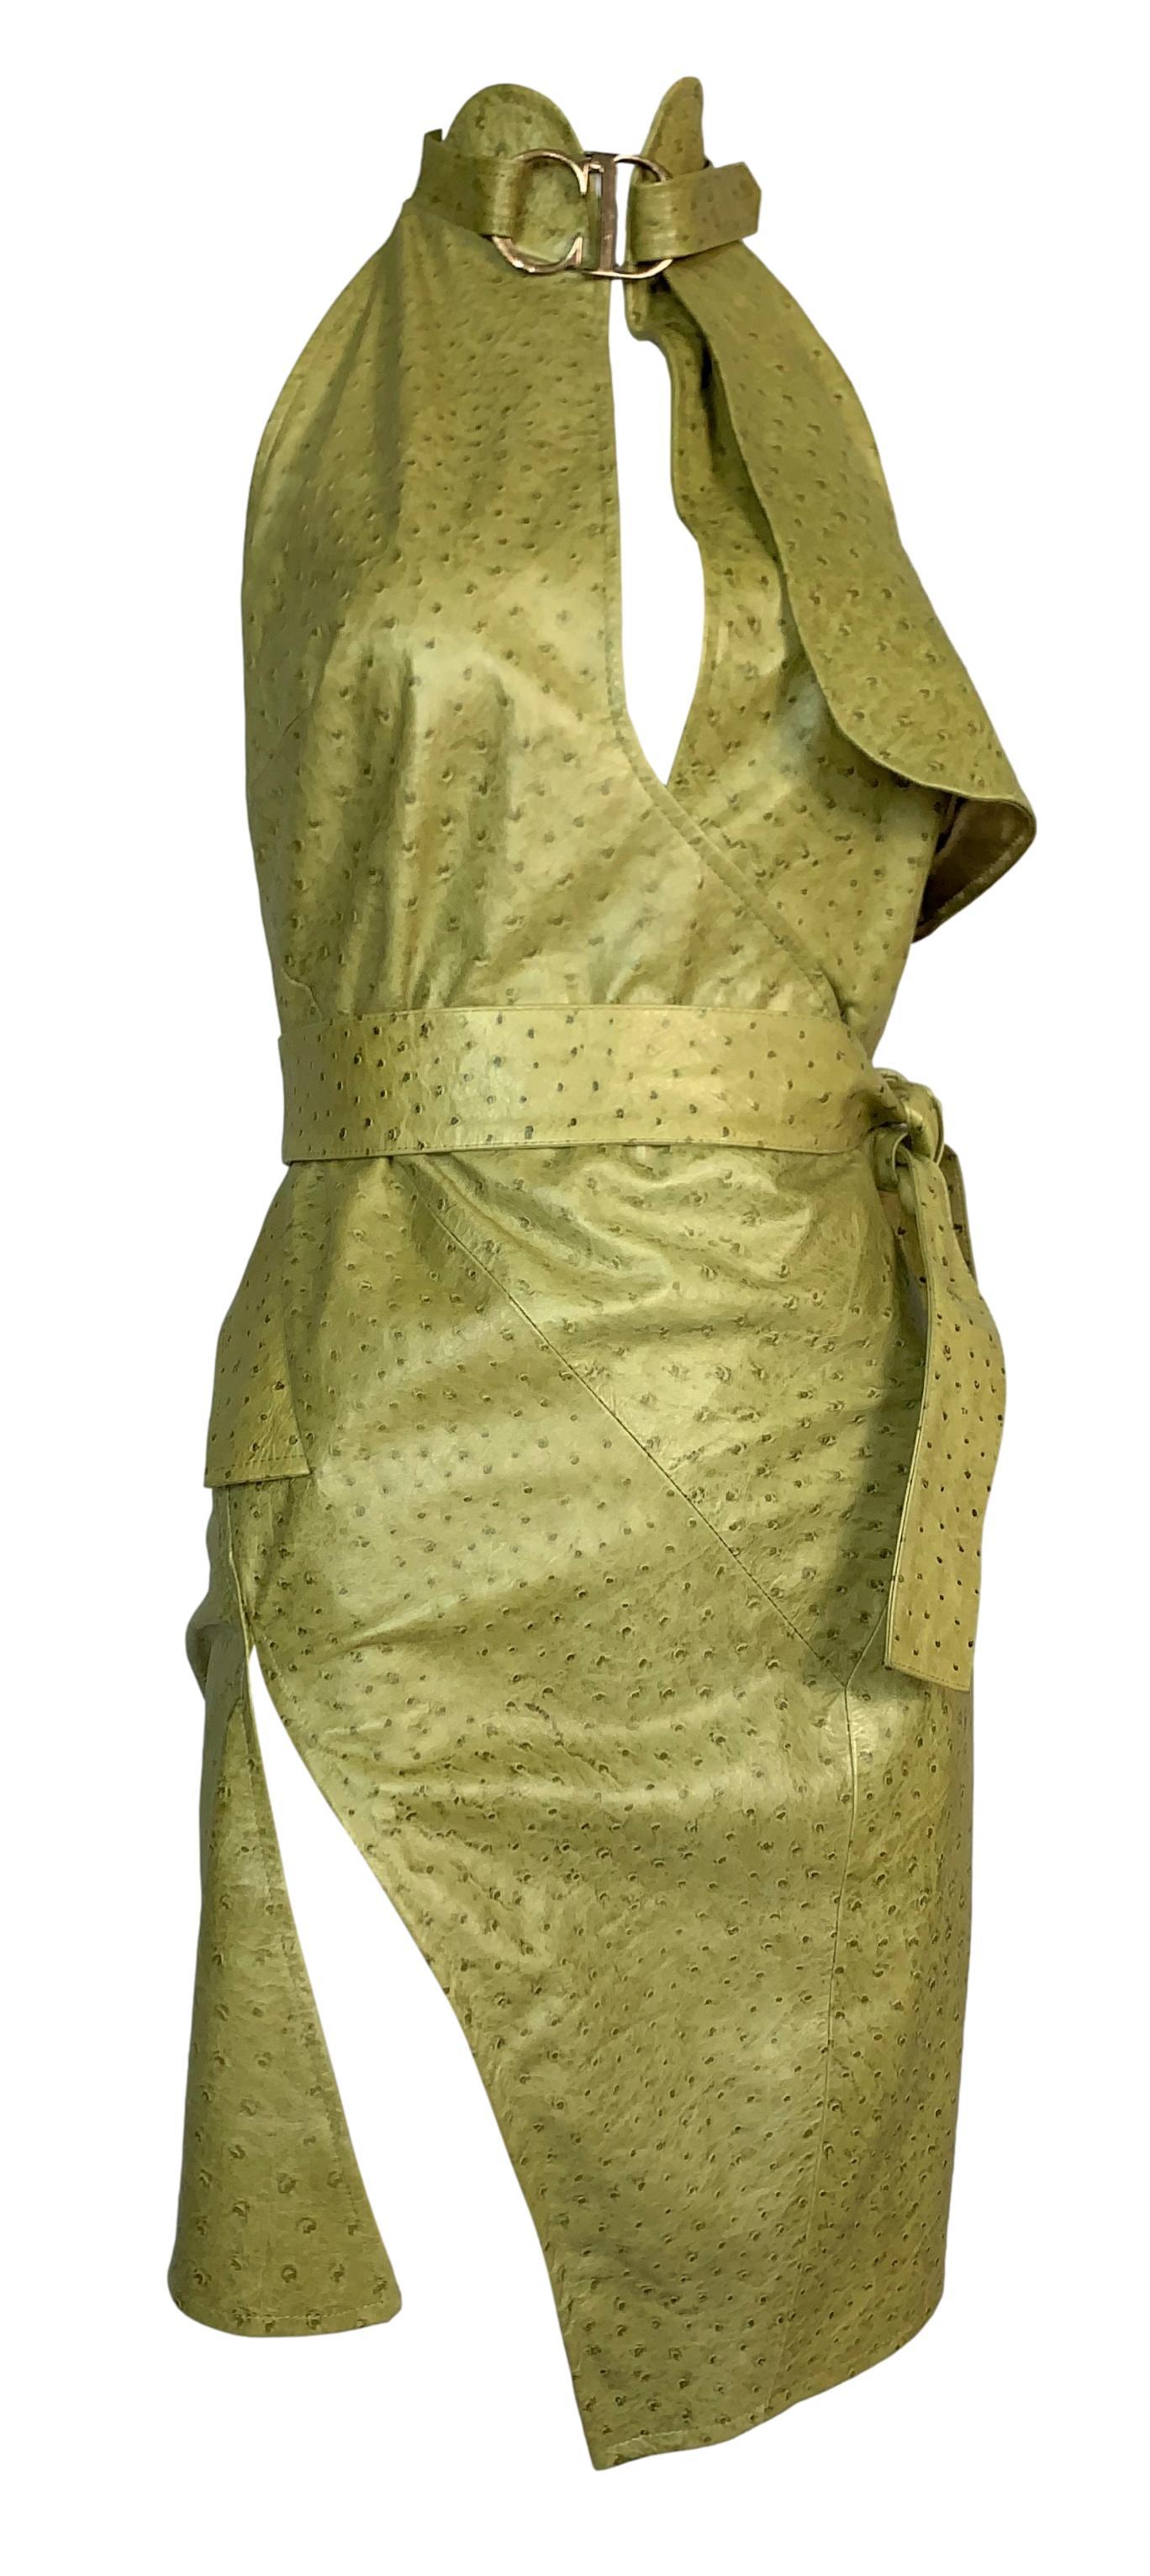 DESIGNER: F/W 2000 Christian Dior by John Galliano

Please contact us for more images or information

CONDITION: Good- light wear- no holes or stains

FABRIC: Ostrich embossed leather

COUNTRY: France

SIZE: F-40

MEASUREMENTS; provided as a